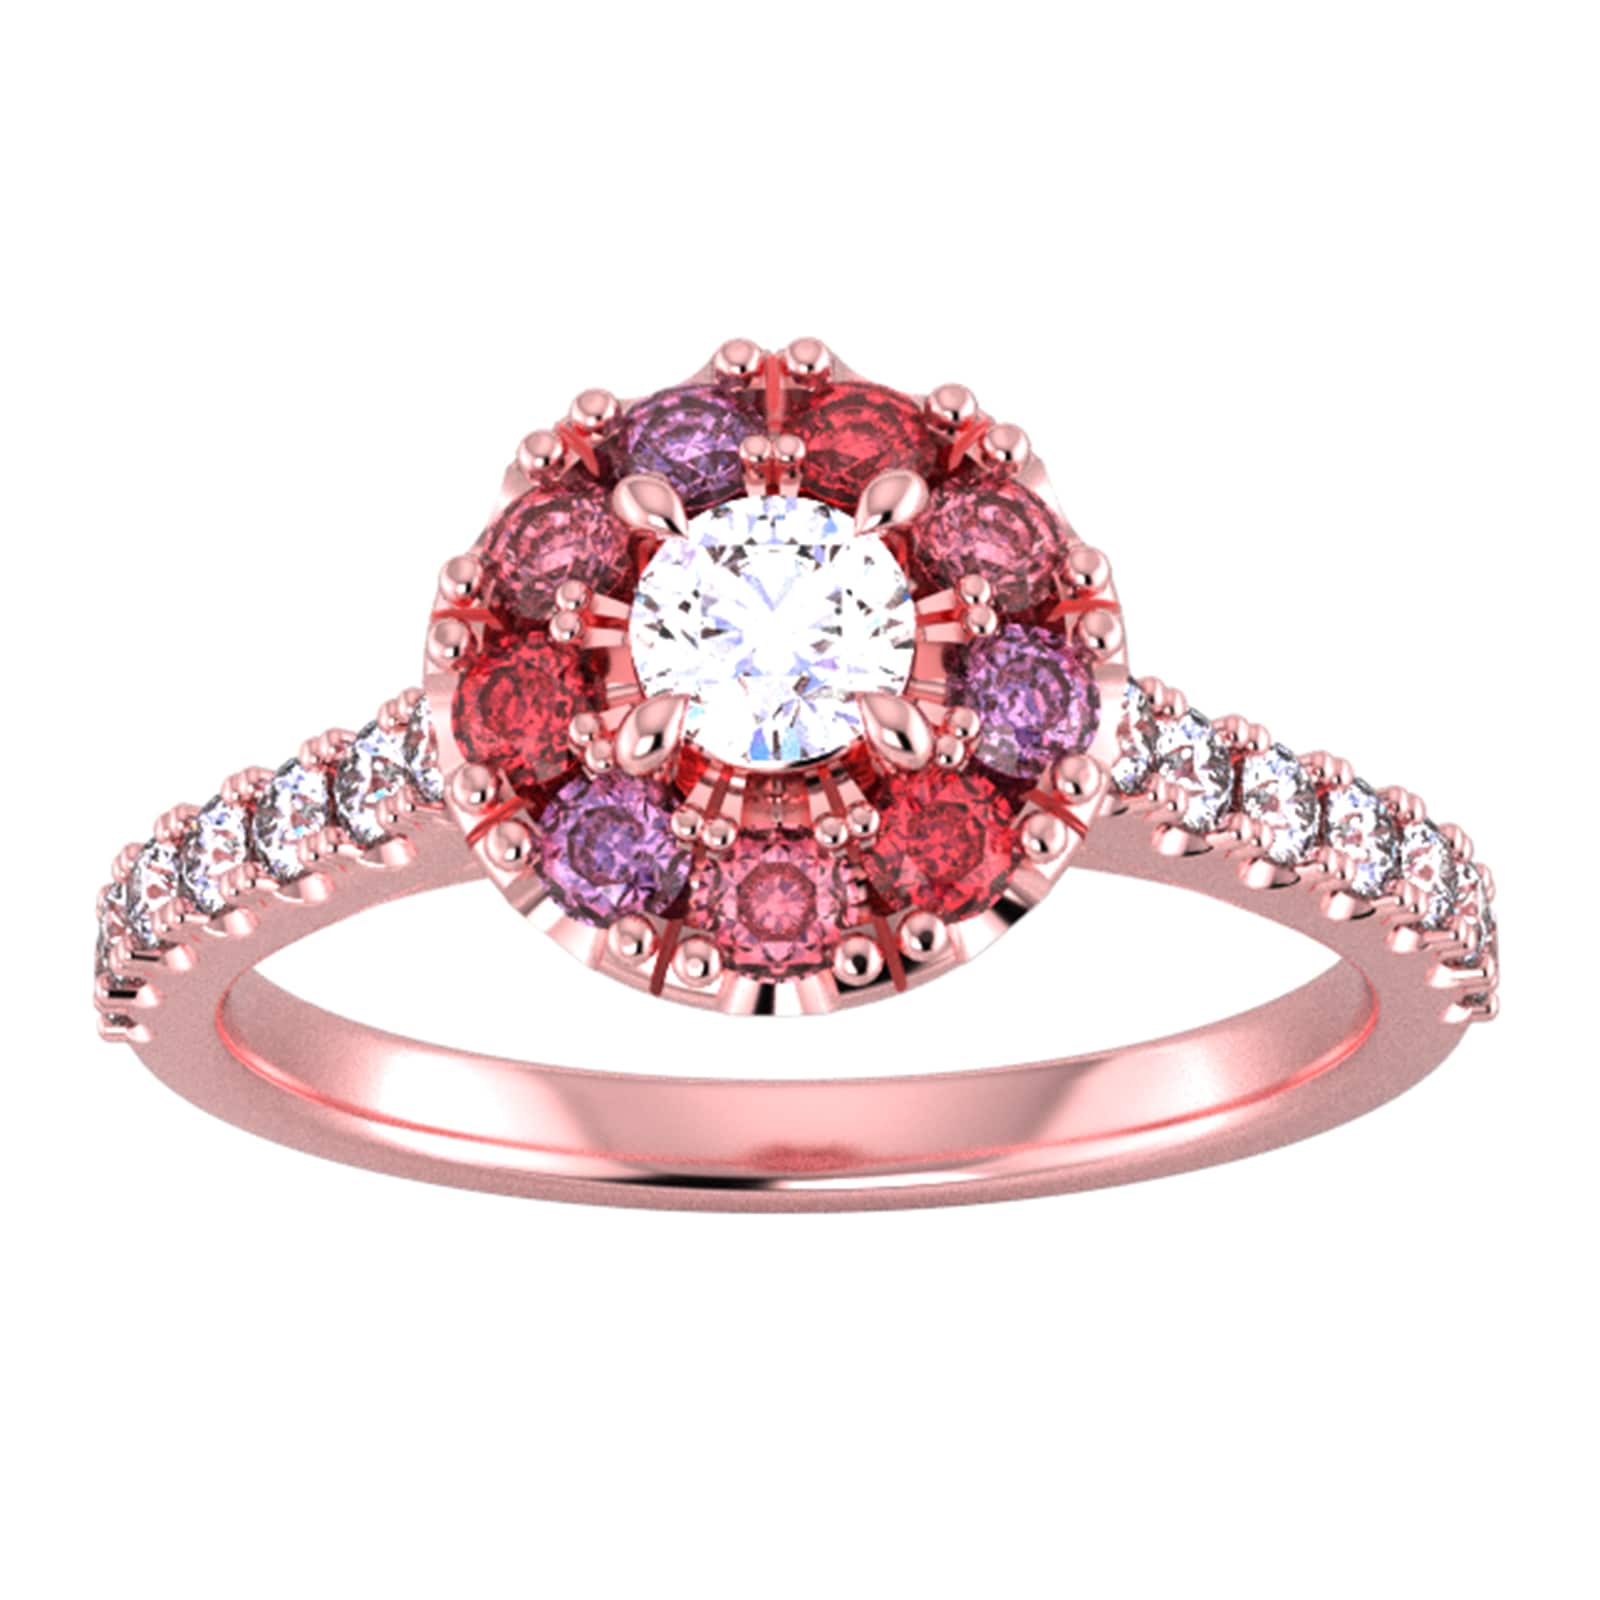 9ct Rose Gold Diamond & Red, Pink, Purple Sapphire Halo Ring - Ring Size E.5